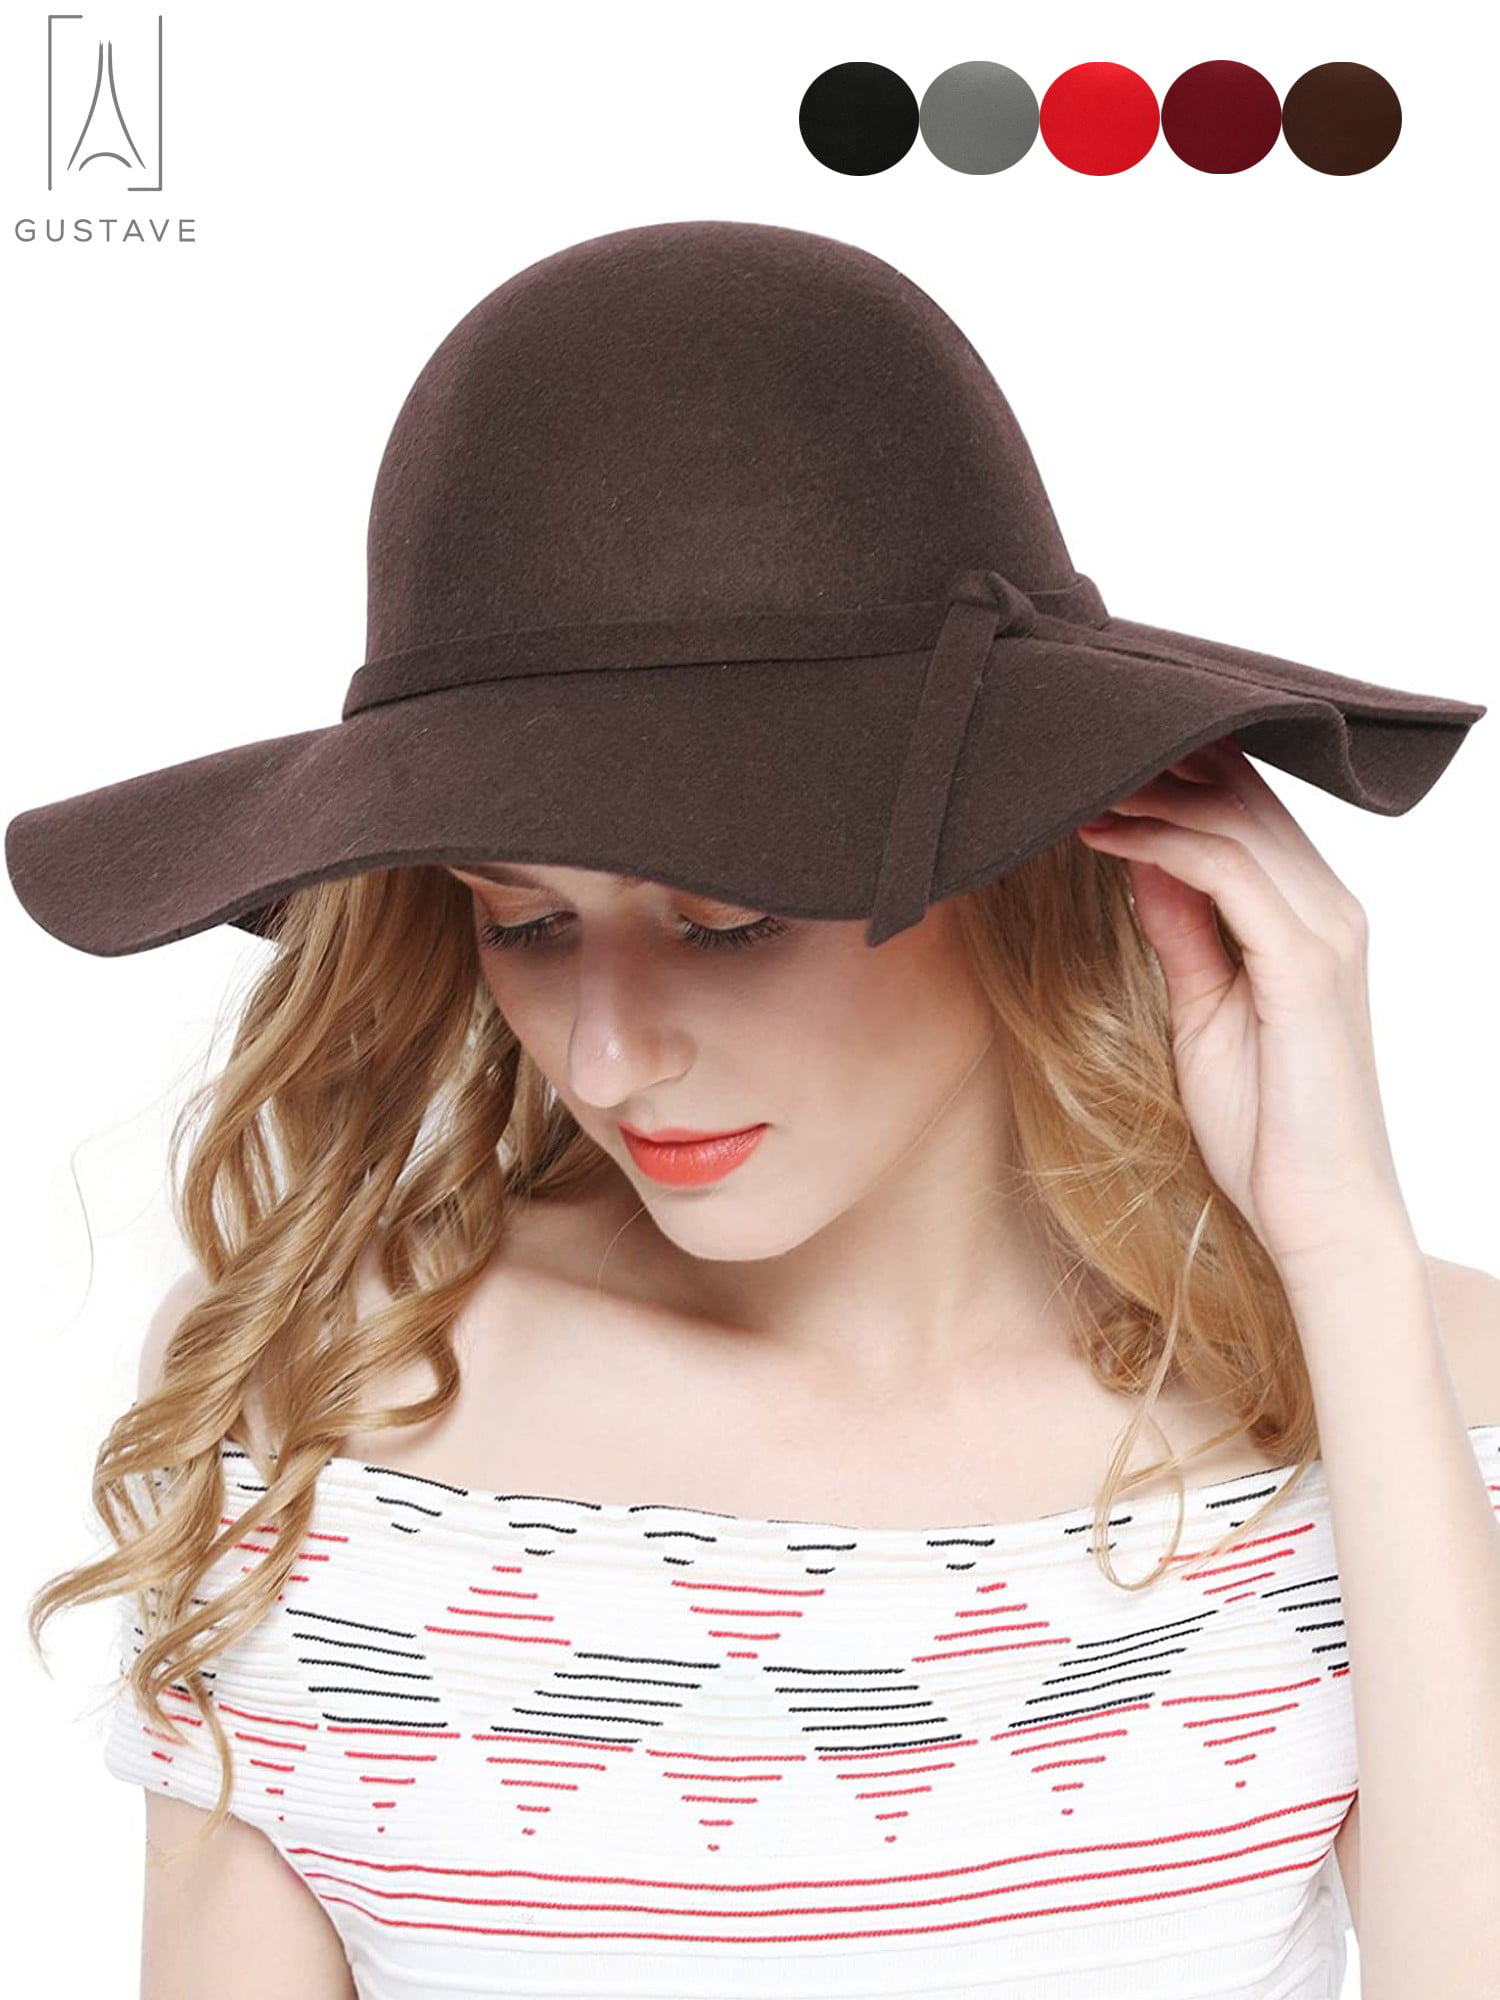 Womens New 100% wool wide brim crushable floppy cloche hat 5 colors 